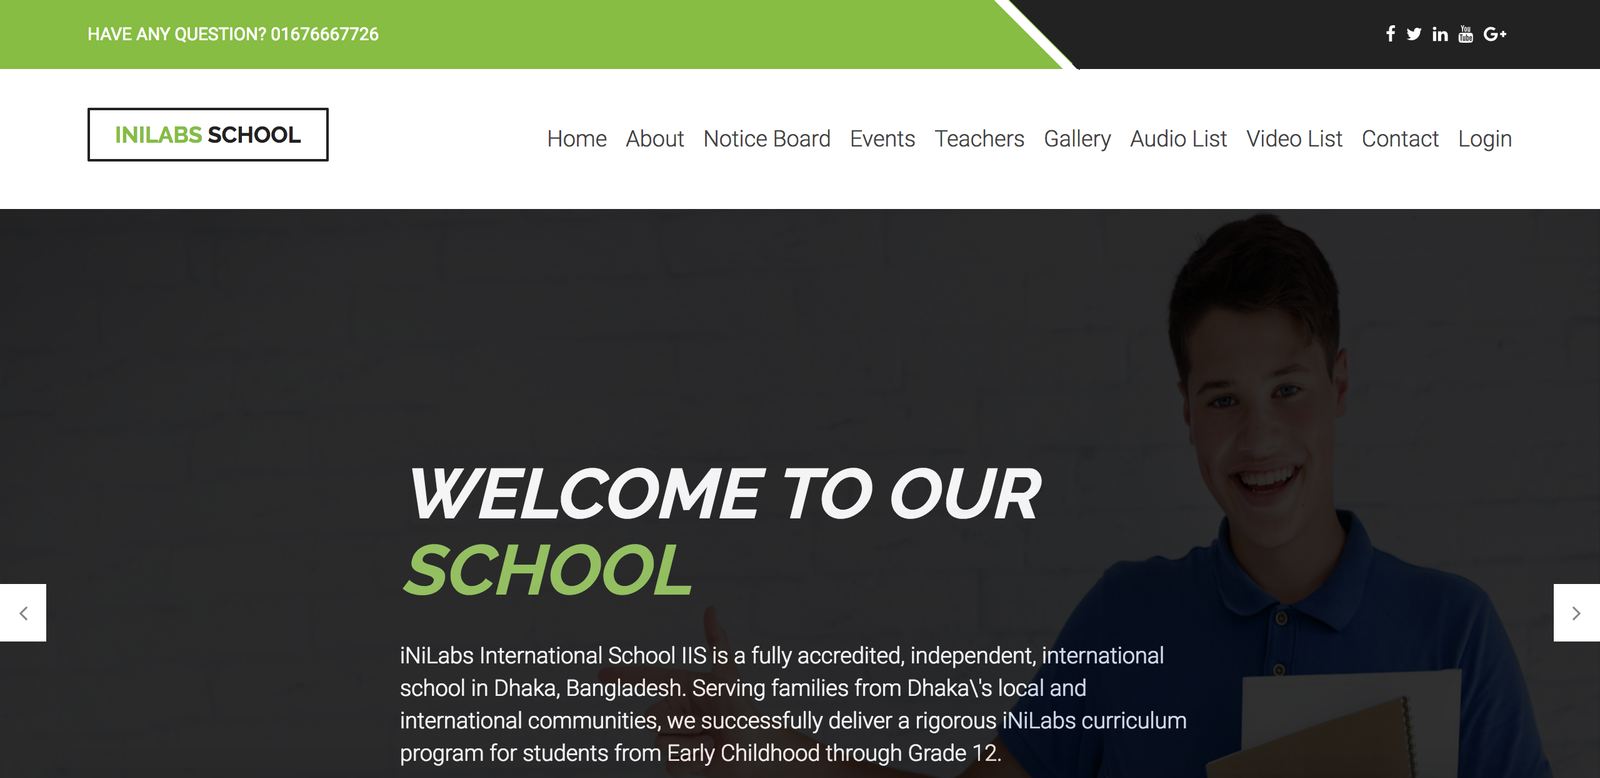 iNilabs School Management System Express - Built in website with advanced content management system